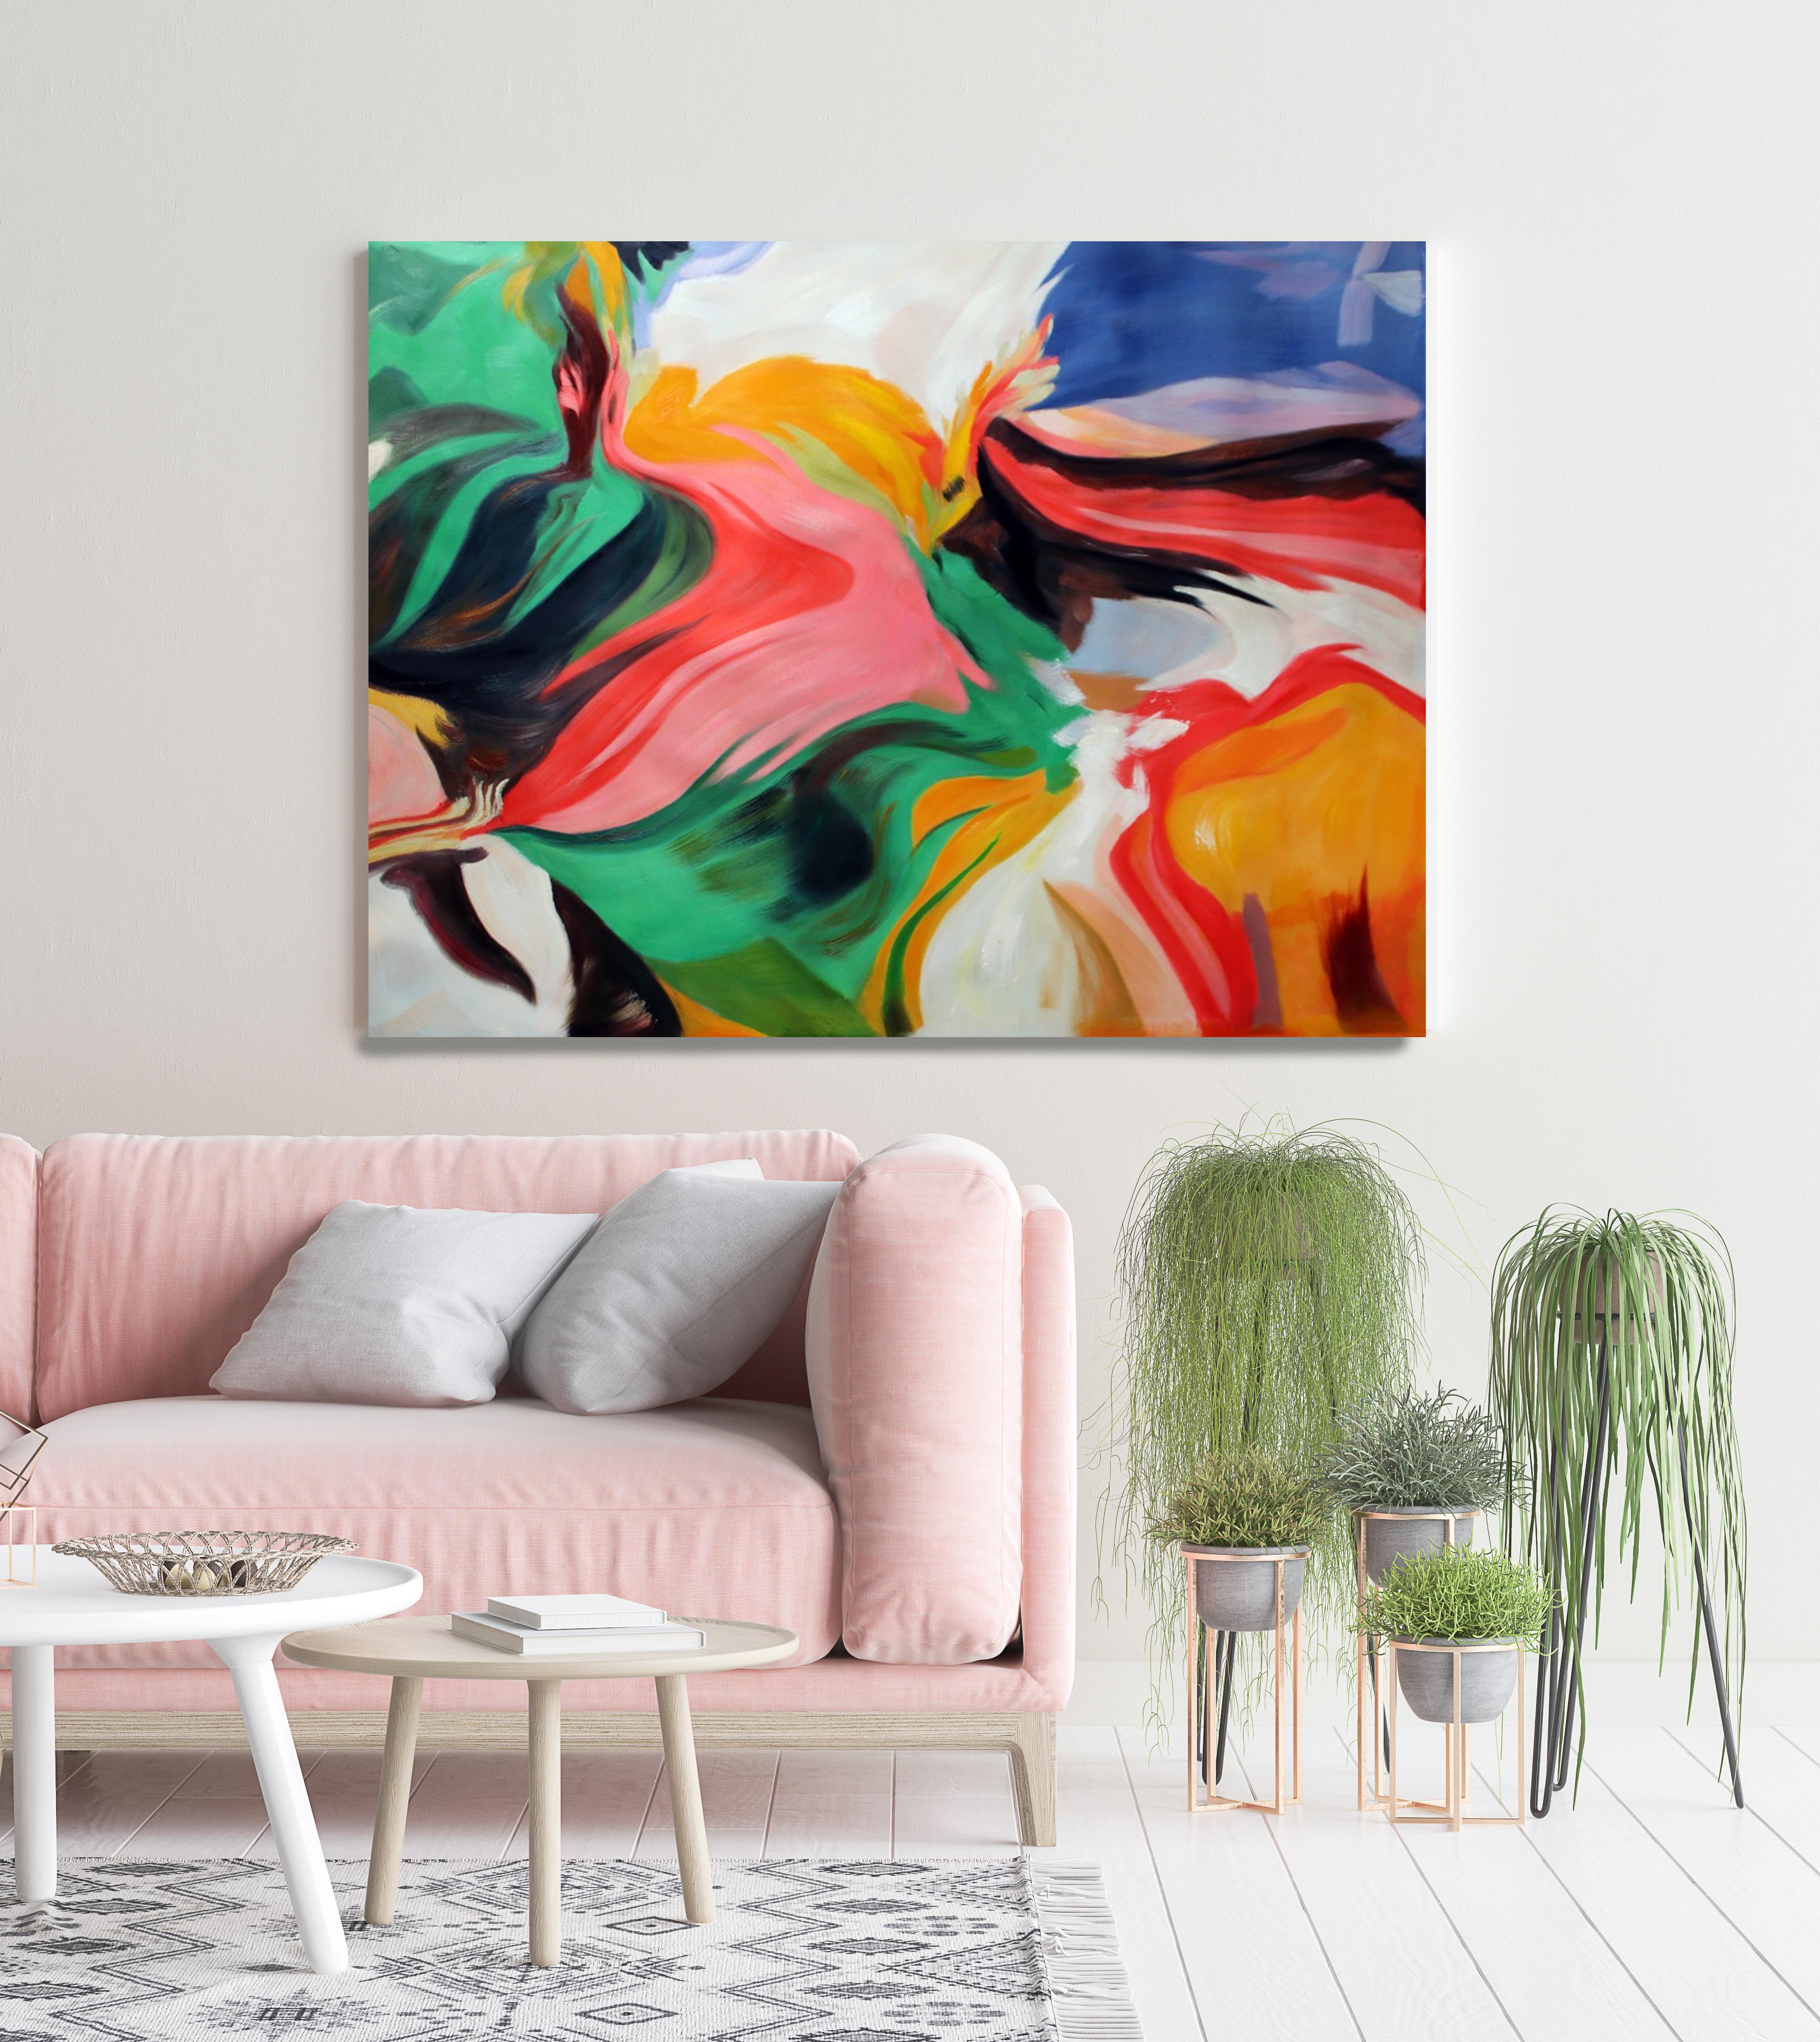 Irena Orlov Interior Painting - Green Pink Flow Contemporary Abstract Acrylic Painting, 48W X 36"H, Challenge